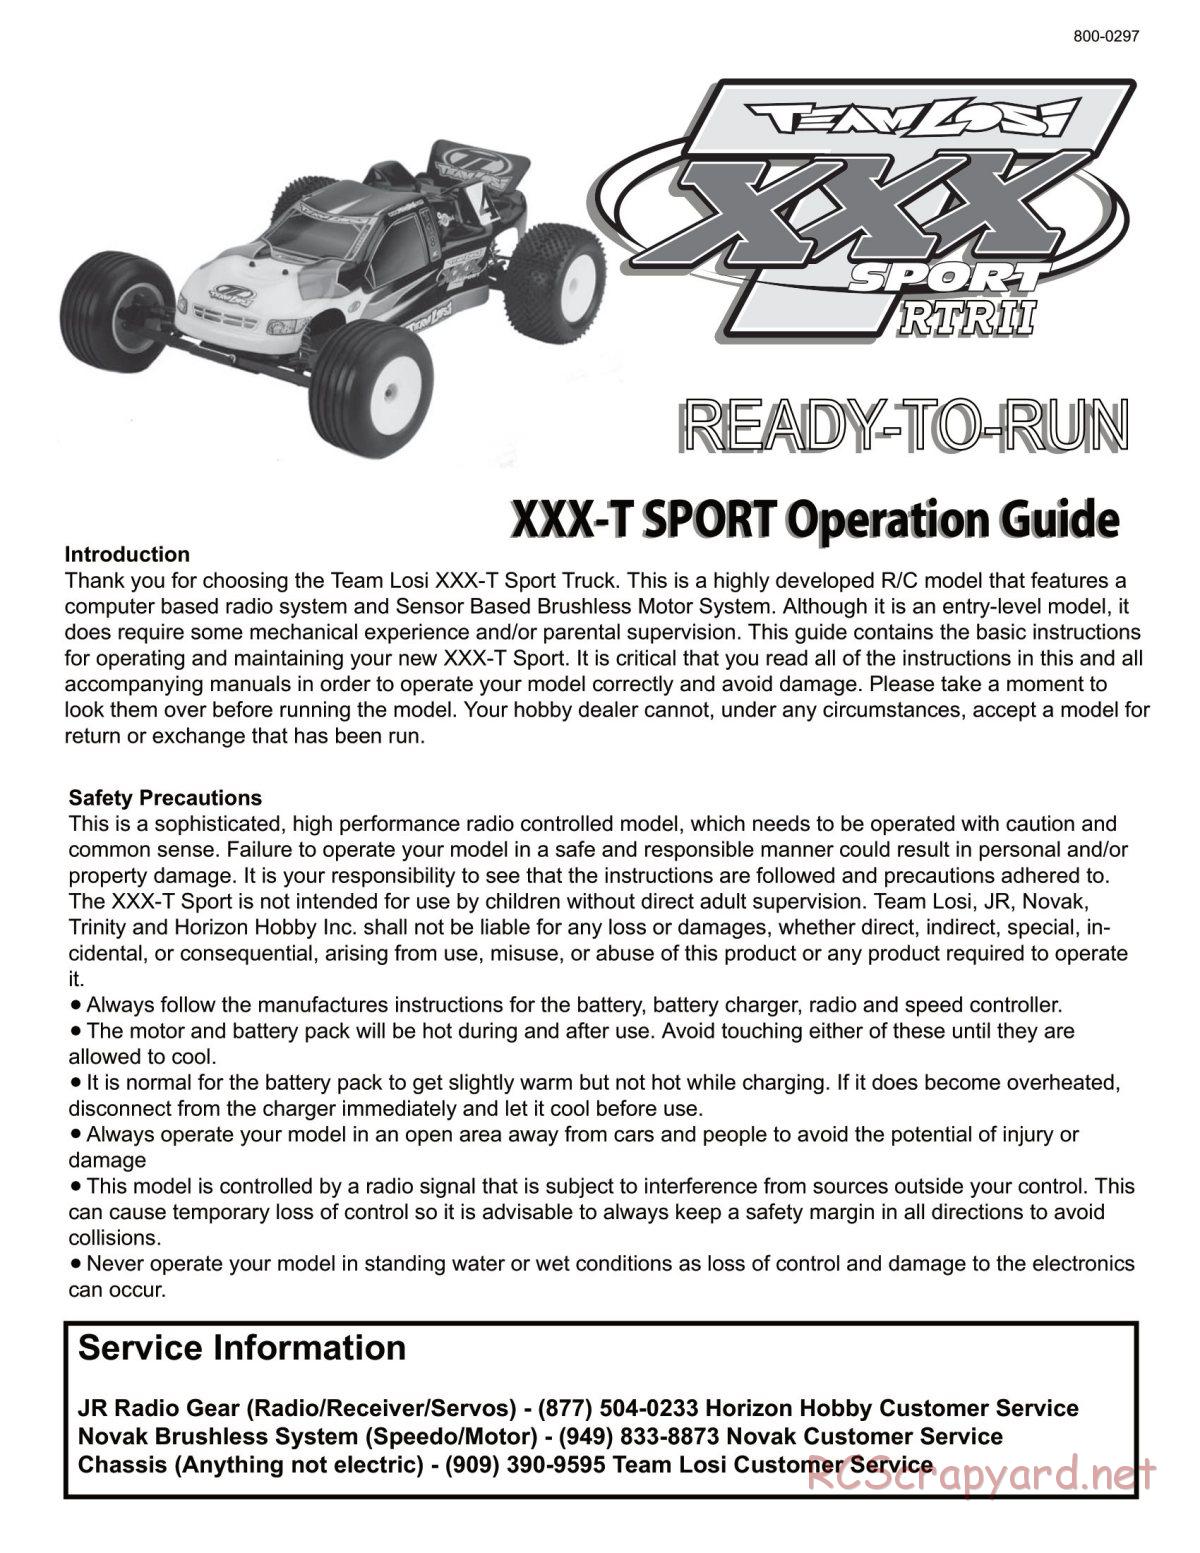 Team Losi - XXX-T Sport Brushless - Manual - Page 1